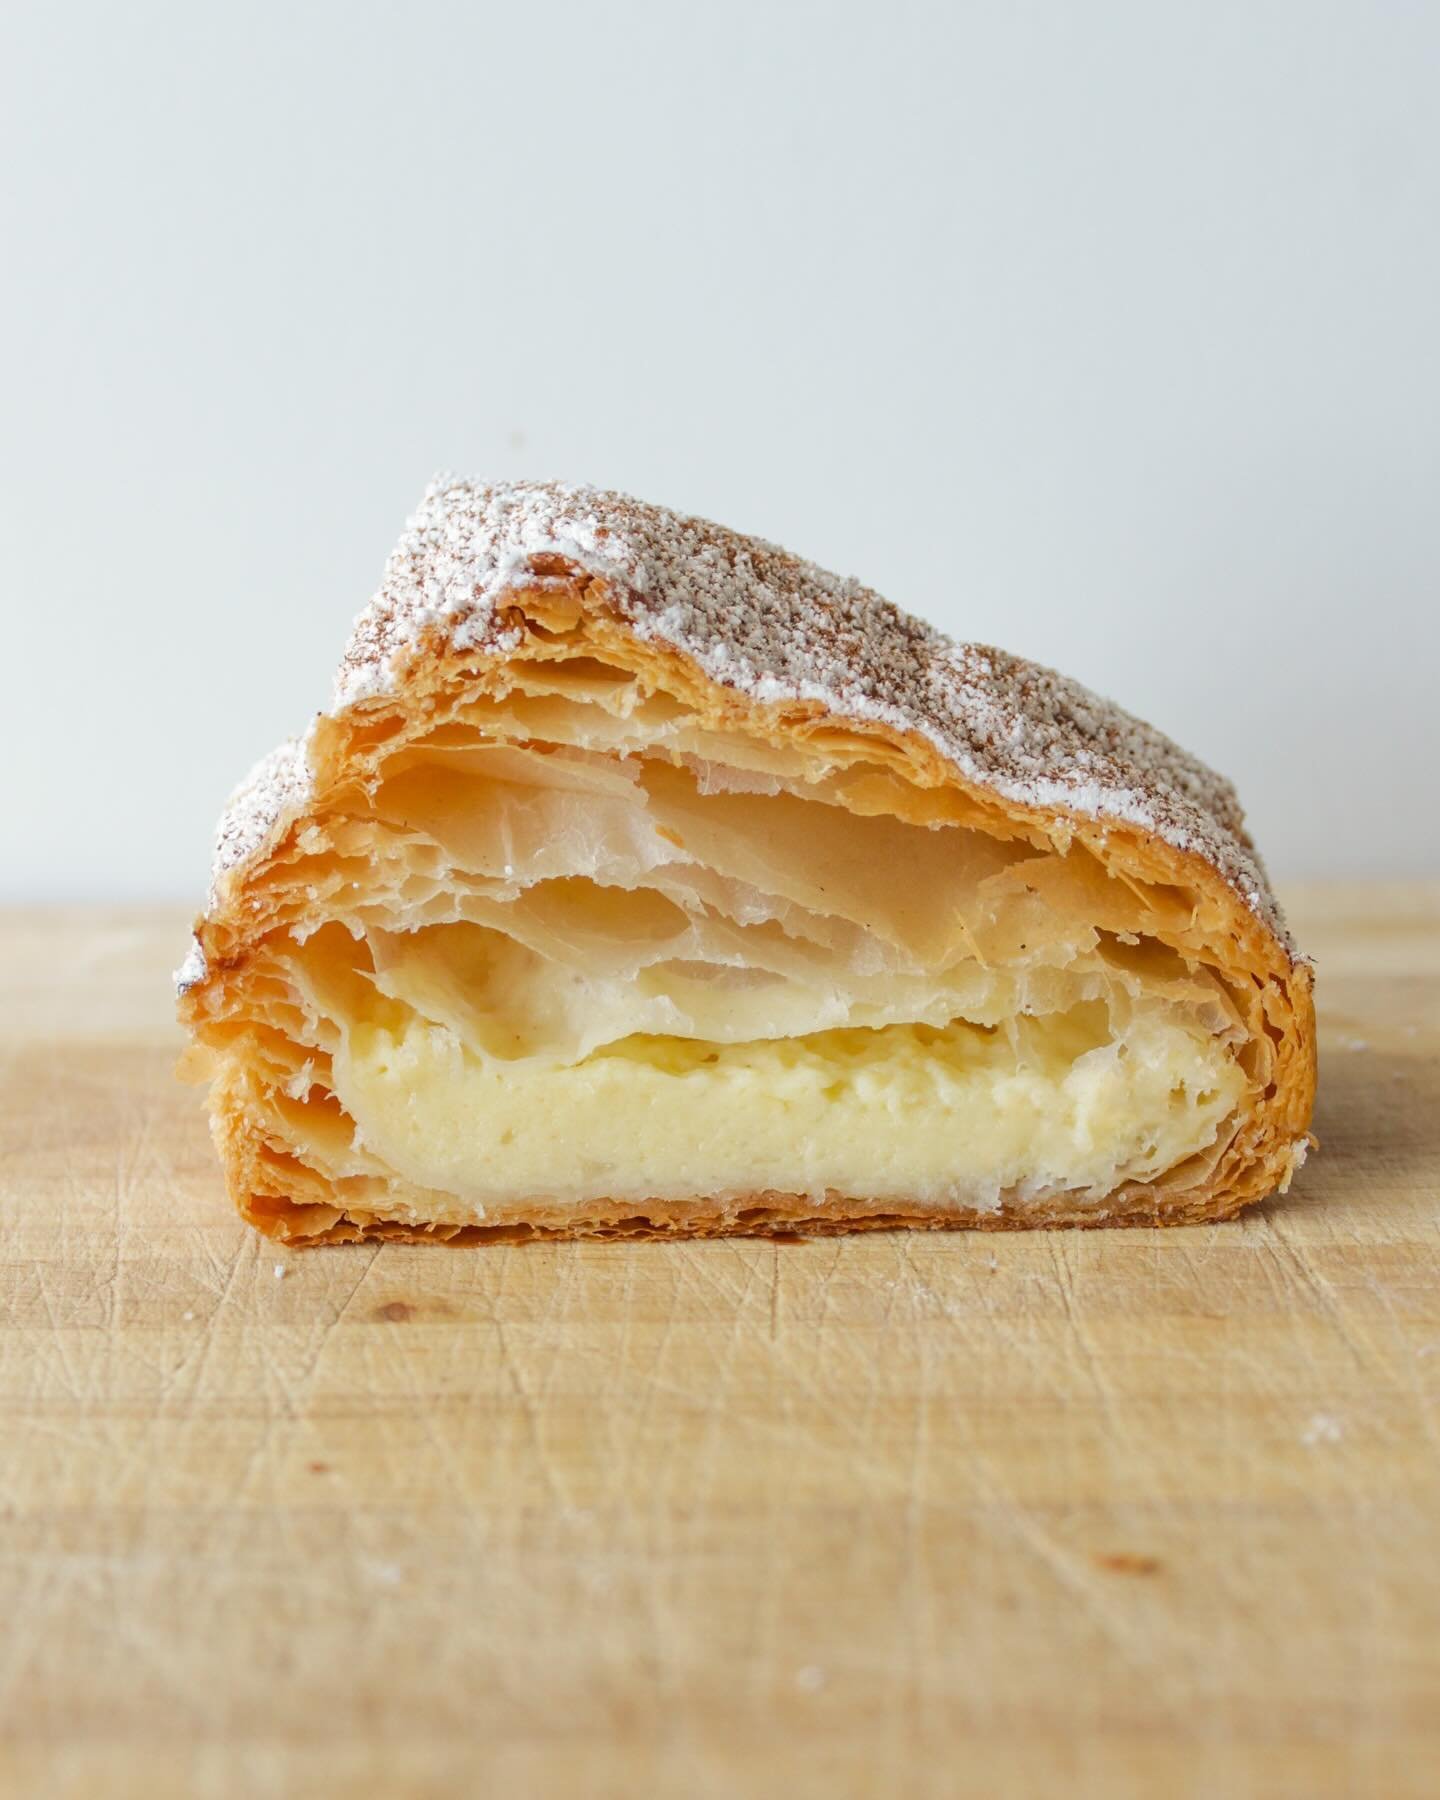 We&rsquo;re back at the Kaka&rsquo;ako Farmers Market this Saturday, 4/13! We&rsquo;ll be bringing back the Bougatsa Puff Turnover, which is a flaky, puff pastry turnover that is filled with a semolina custard. The custard is flavored using local van